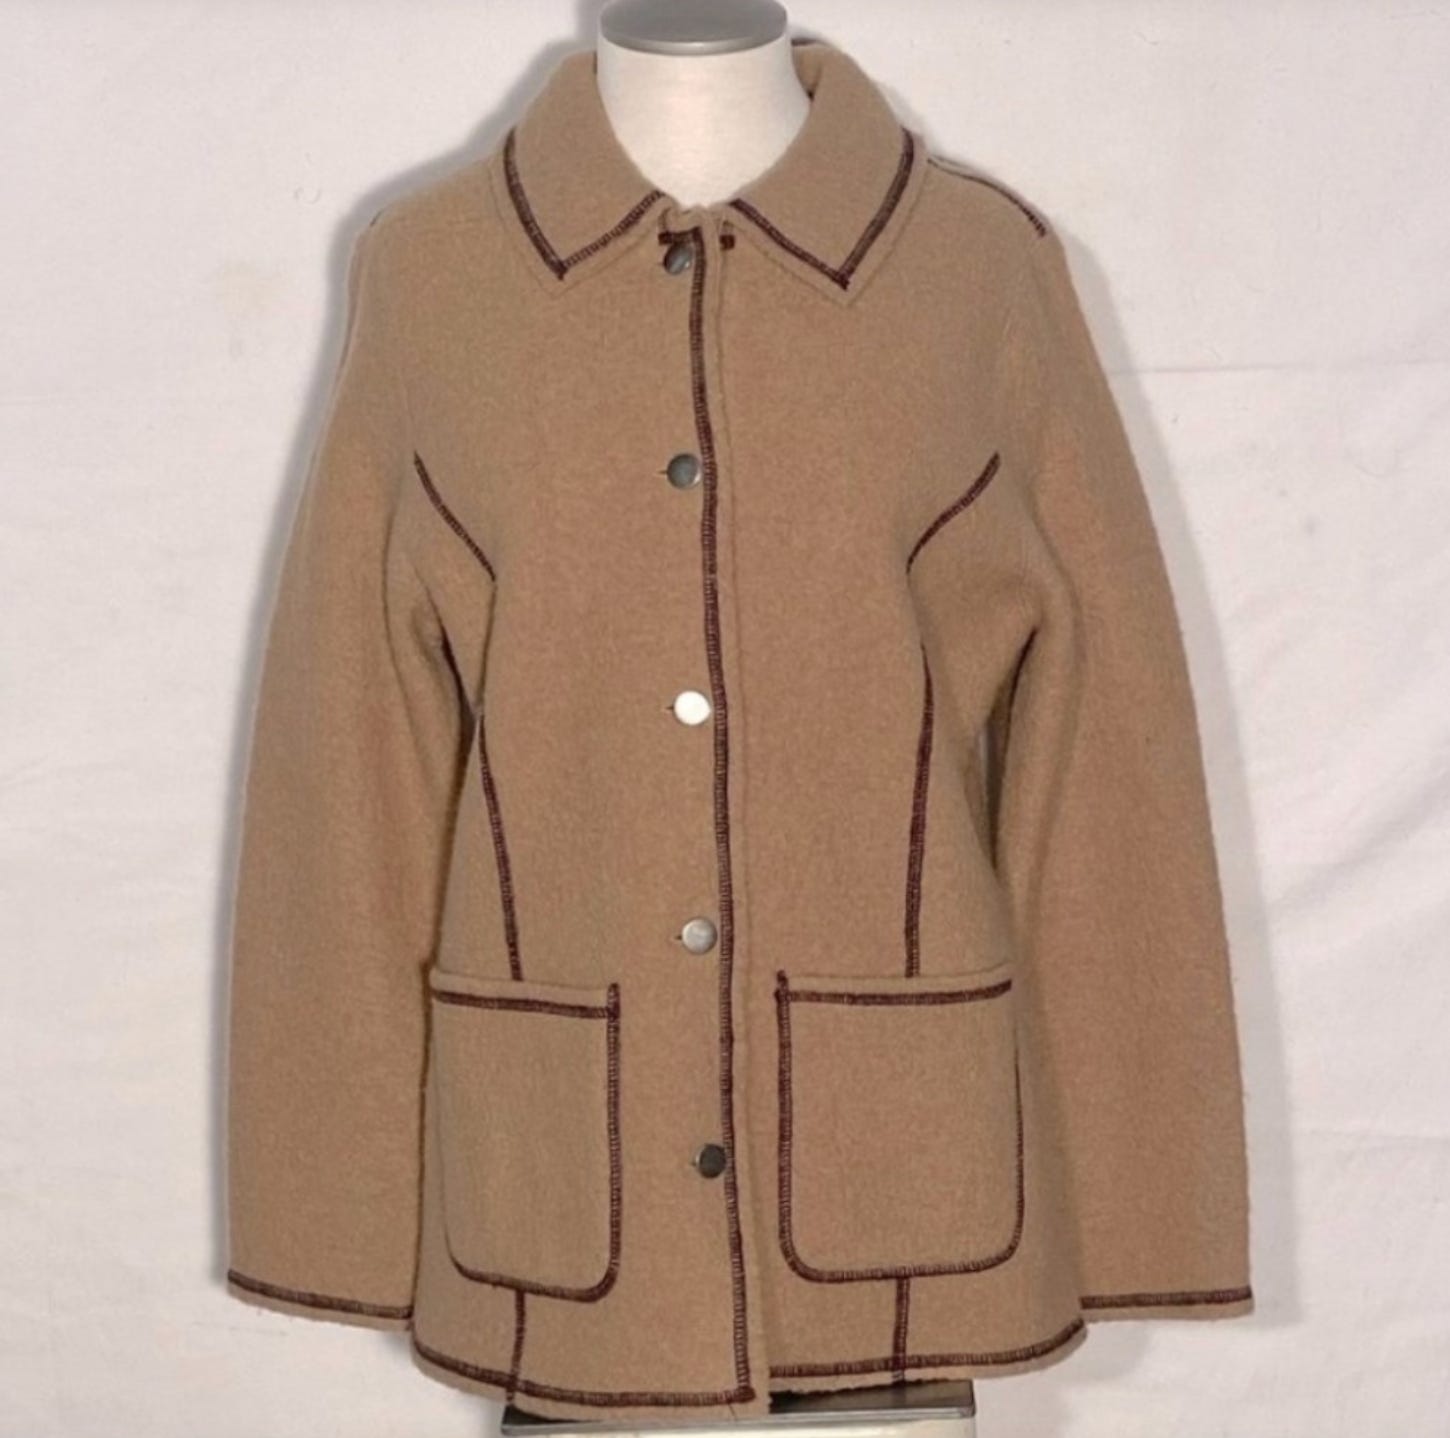 brown boiled wool button up jacket with darker brown piping